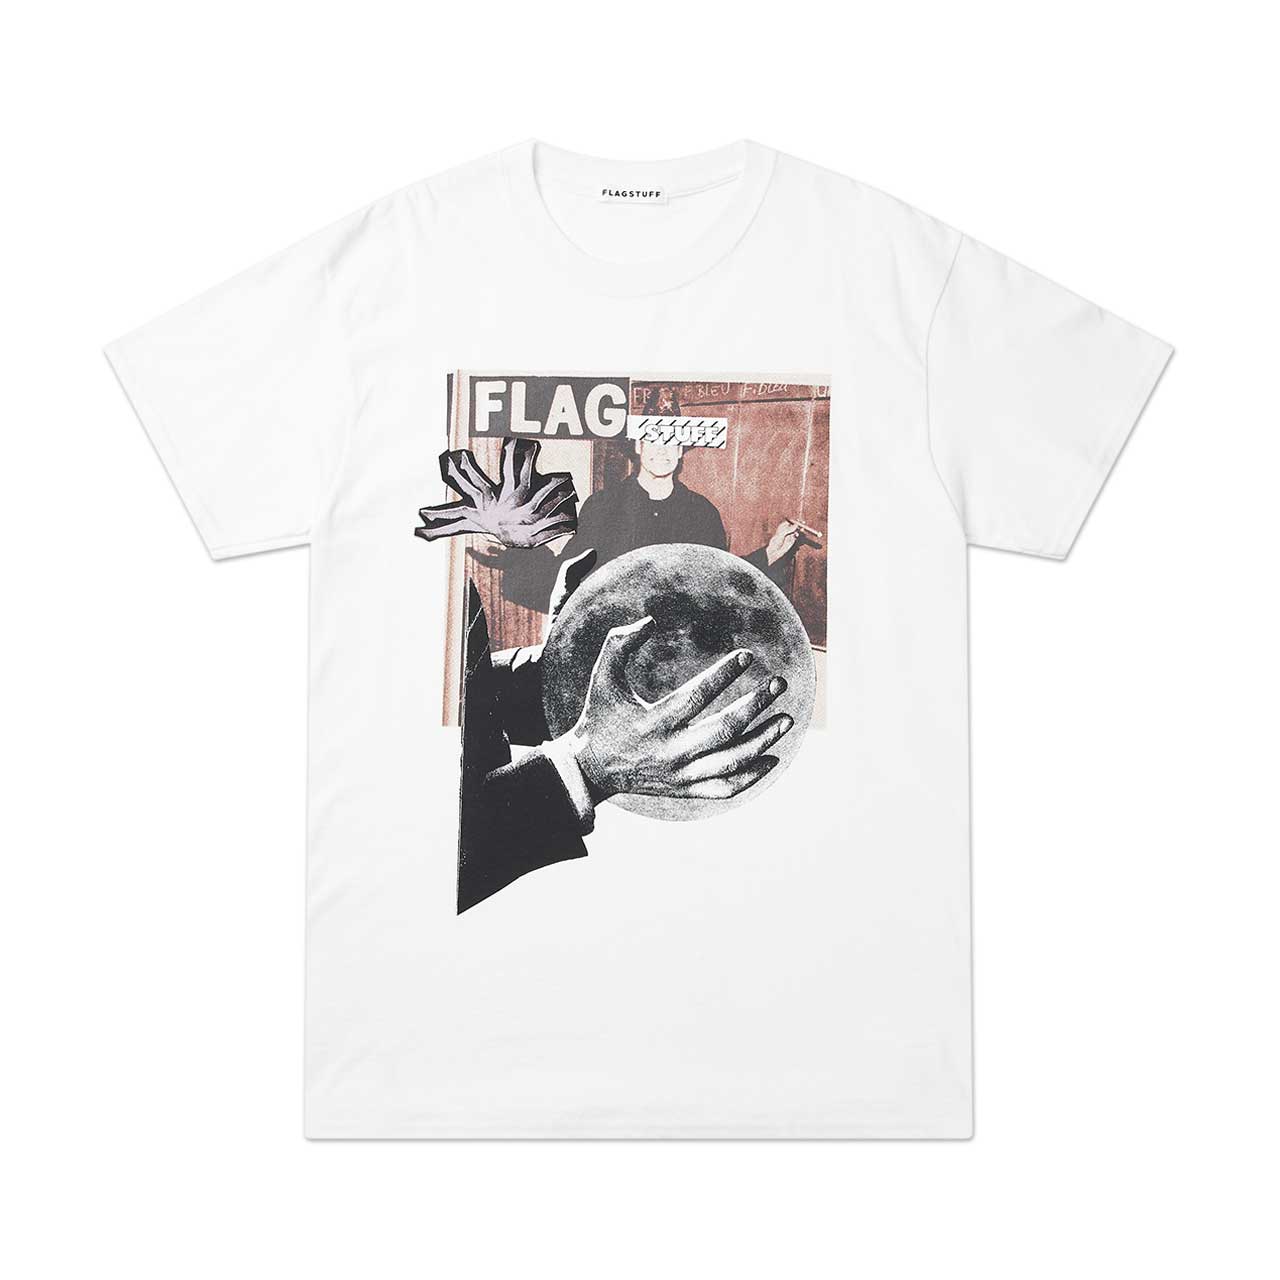 flagstuff "cut up" s/s tee (white) - 20aw-fs-78 - a.plus - Image - 1